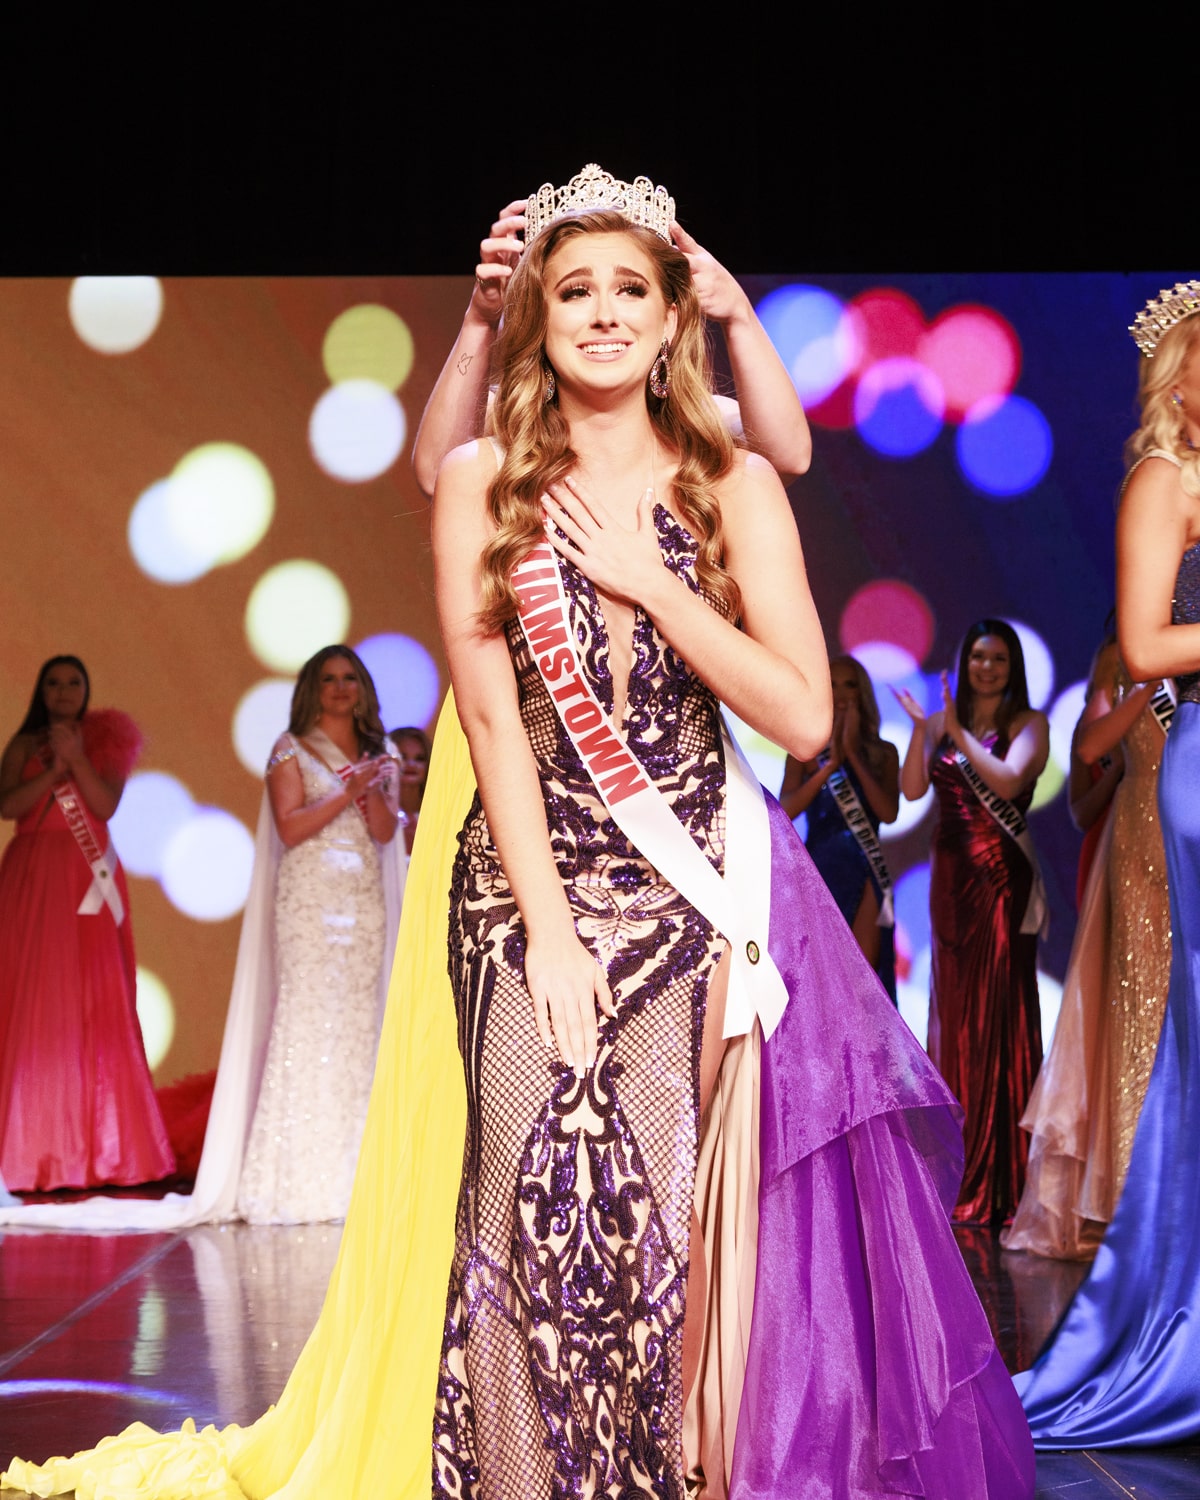 West Virginia Teen USA 2022 pageant 06